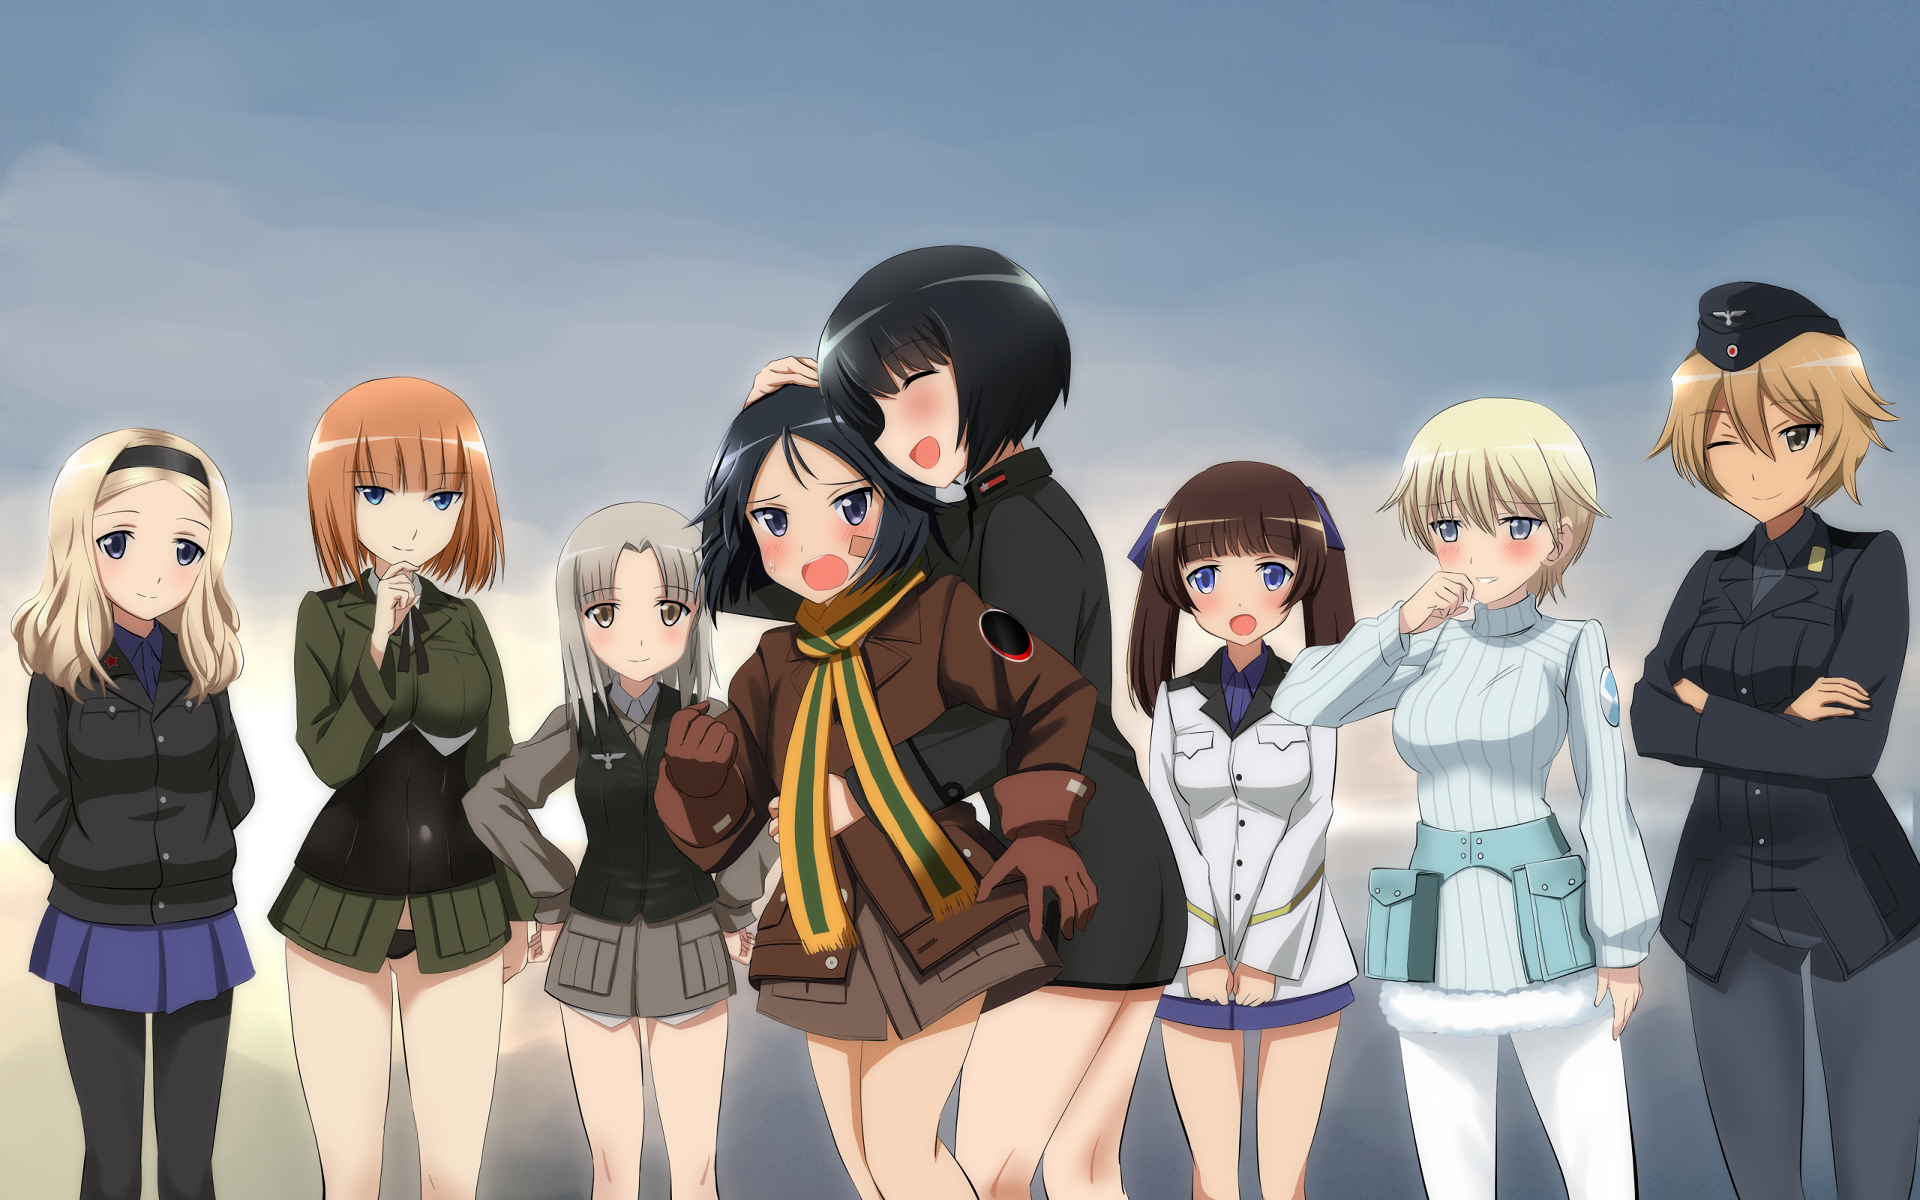 Brave Witches Wallpapers